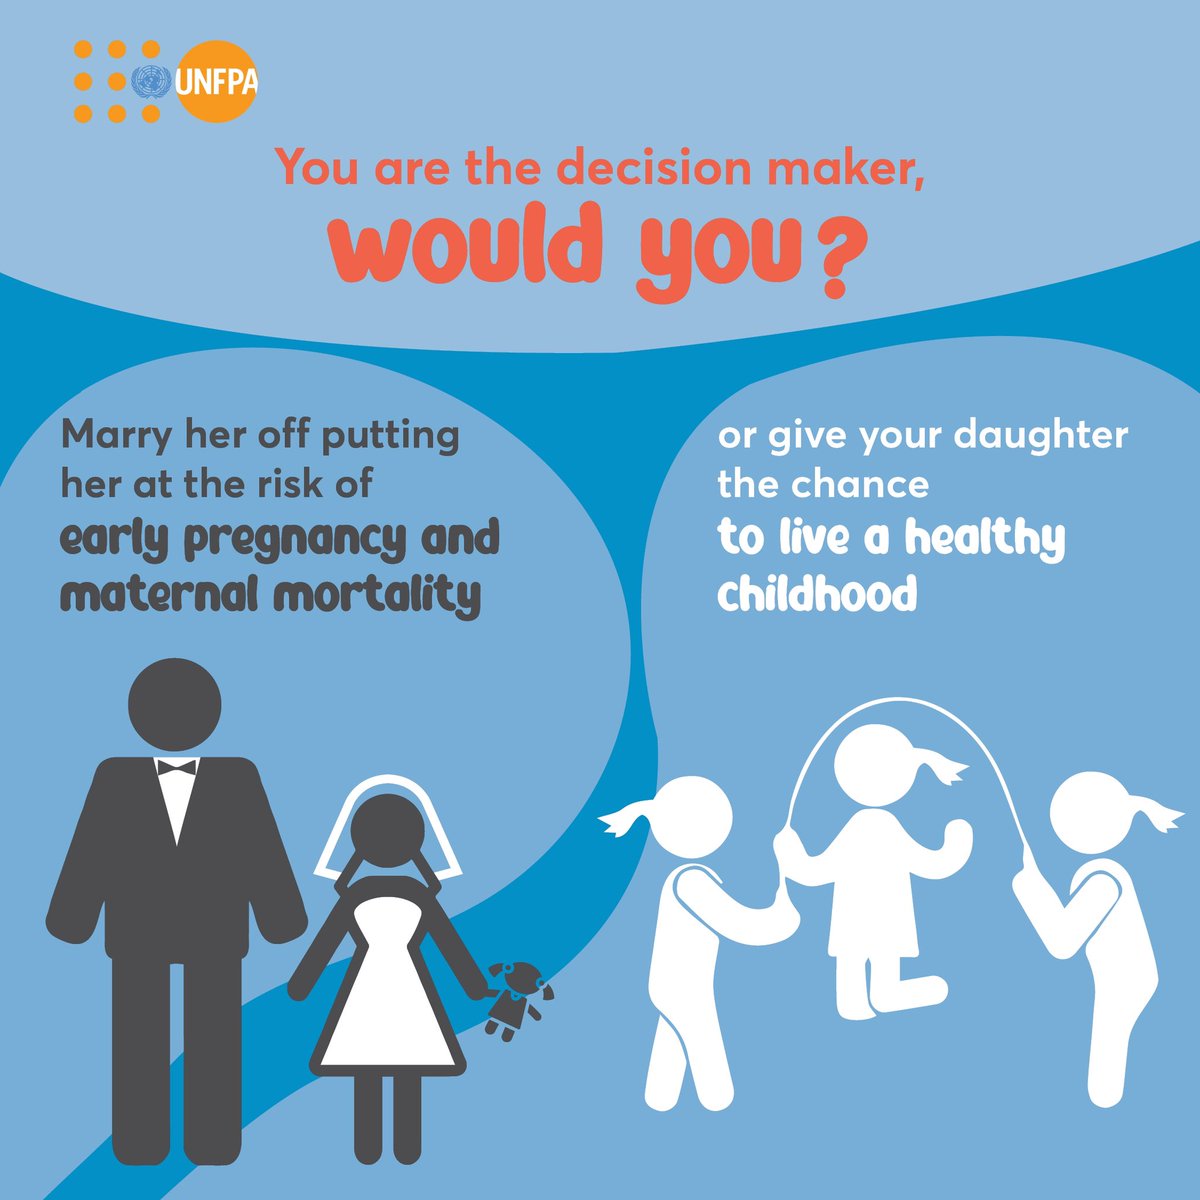 Child marriage robs girls of their childhood and threatens their lives and health. Drop a heart if you agree to give her a chance to live a healthy childhood and join @UNFPA to #ENDChildMarrriage